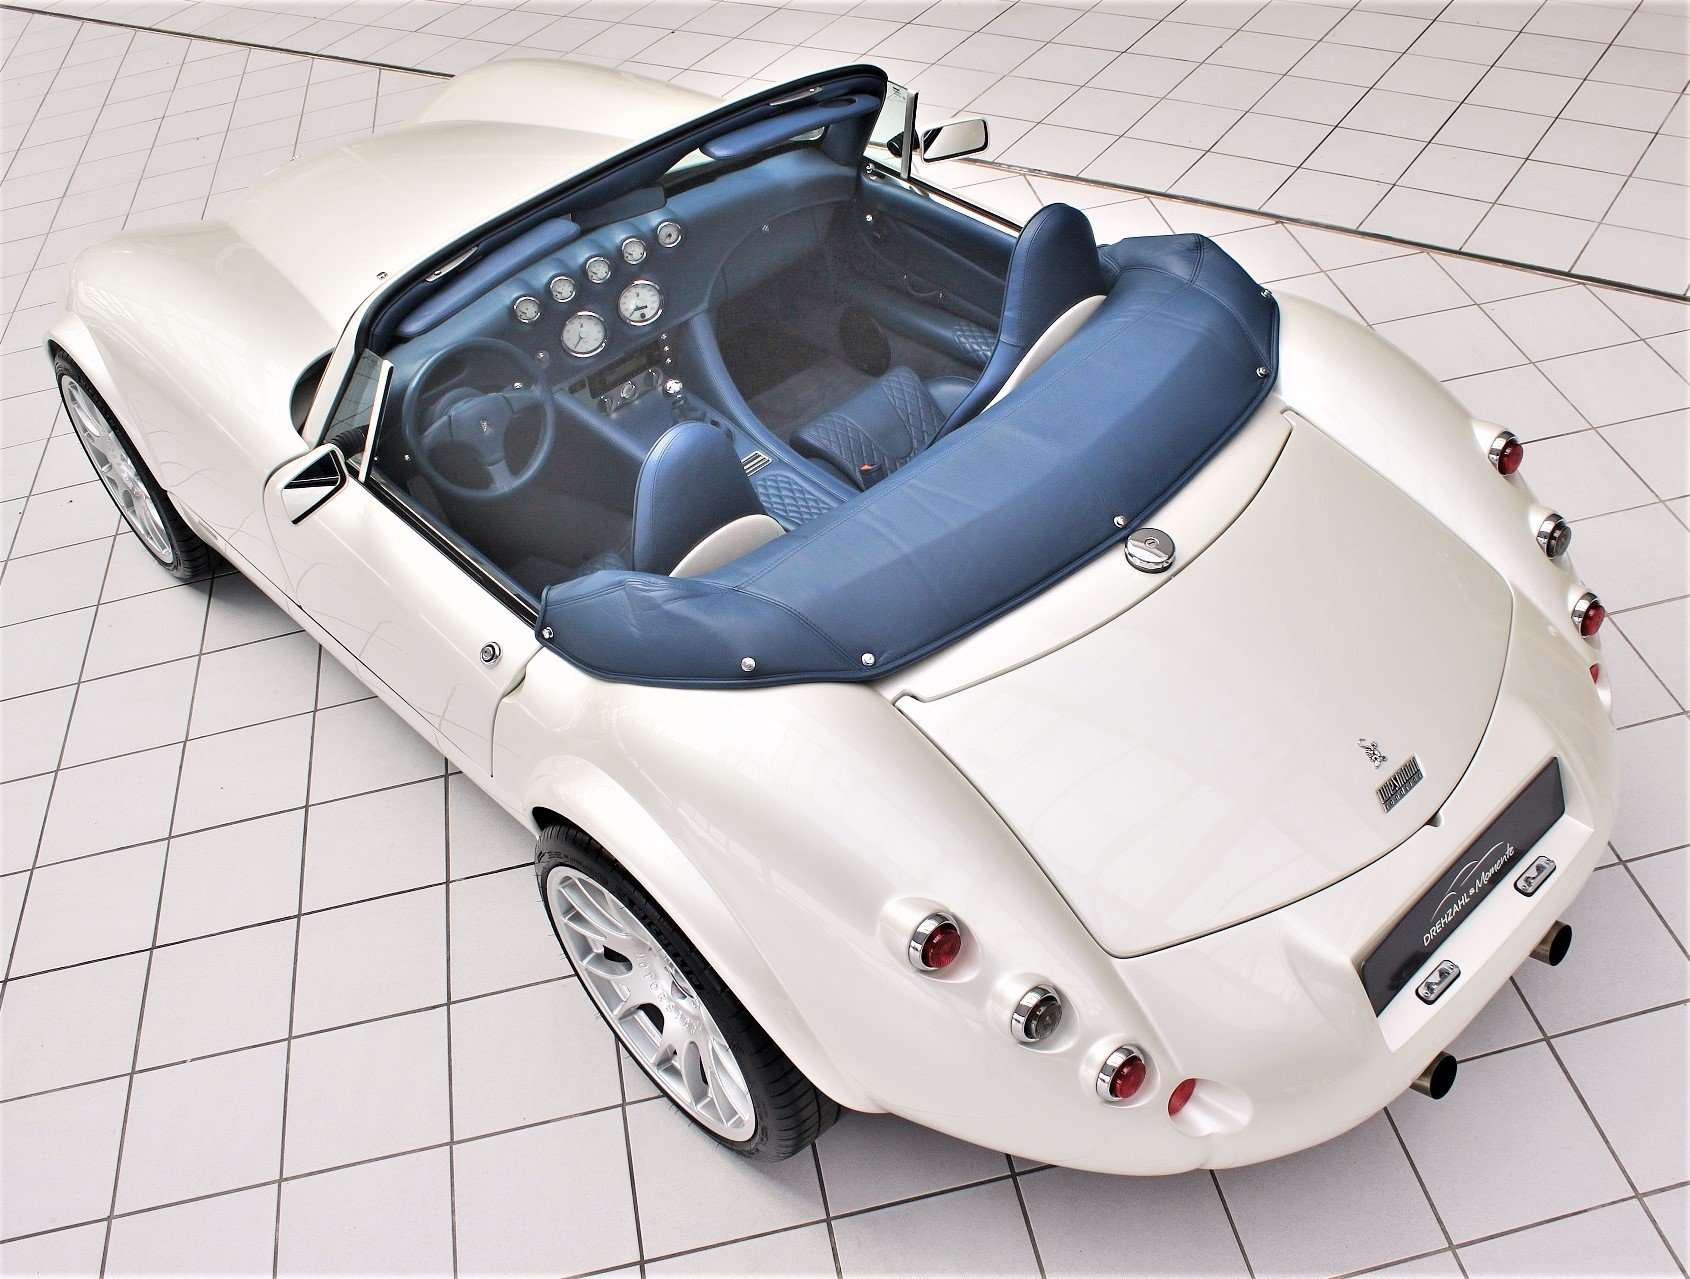 Wiesmann MF 3 Convertible in White used in Münster for € 132,500.-